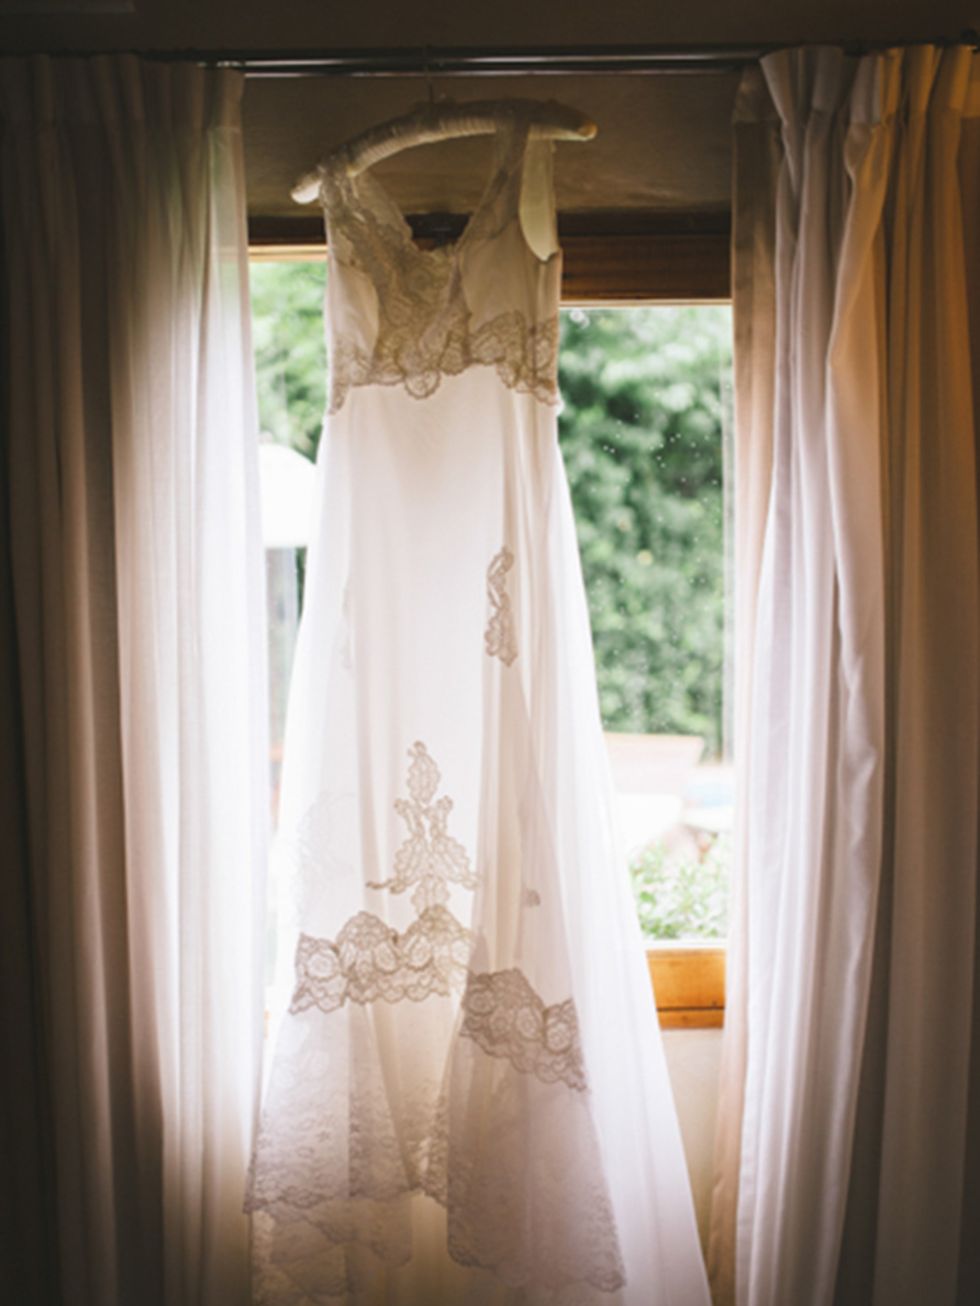 <p>For my wedding dress, I wanted something classic and timeless so opted for the <a href="http://www.charliebrear.com/" target="_blank">Vintage Wedding Dress Company</a> who do an array of fantastic wedding dresses and veils.</p>

<p>The dress needed to 